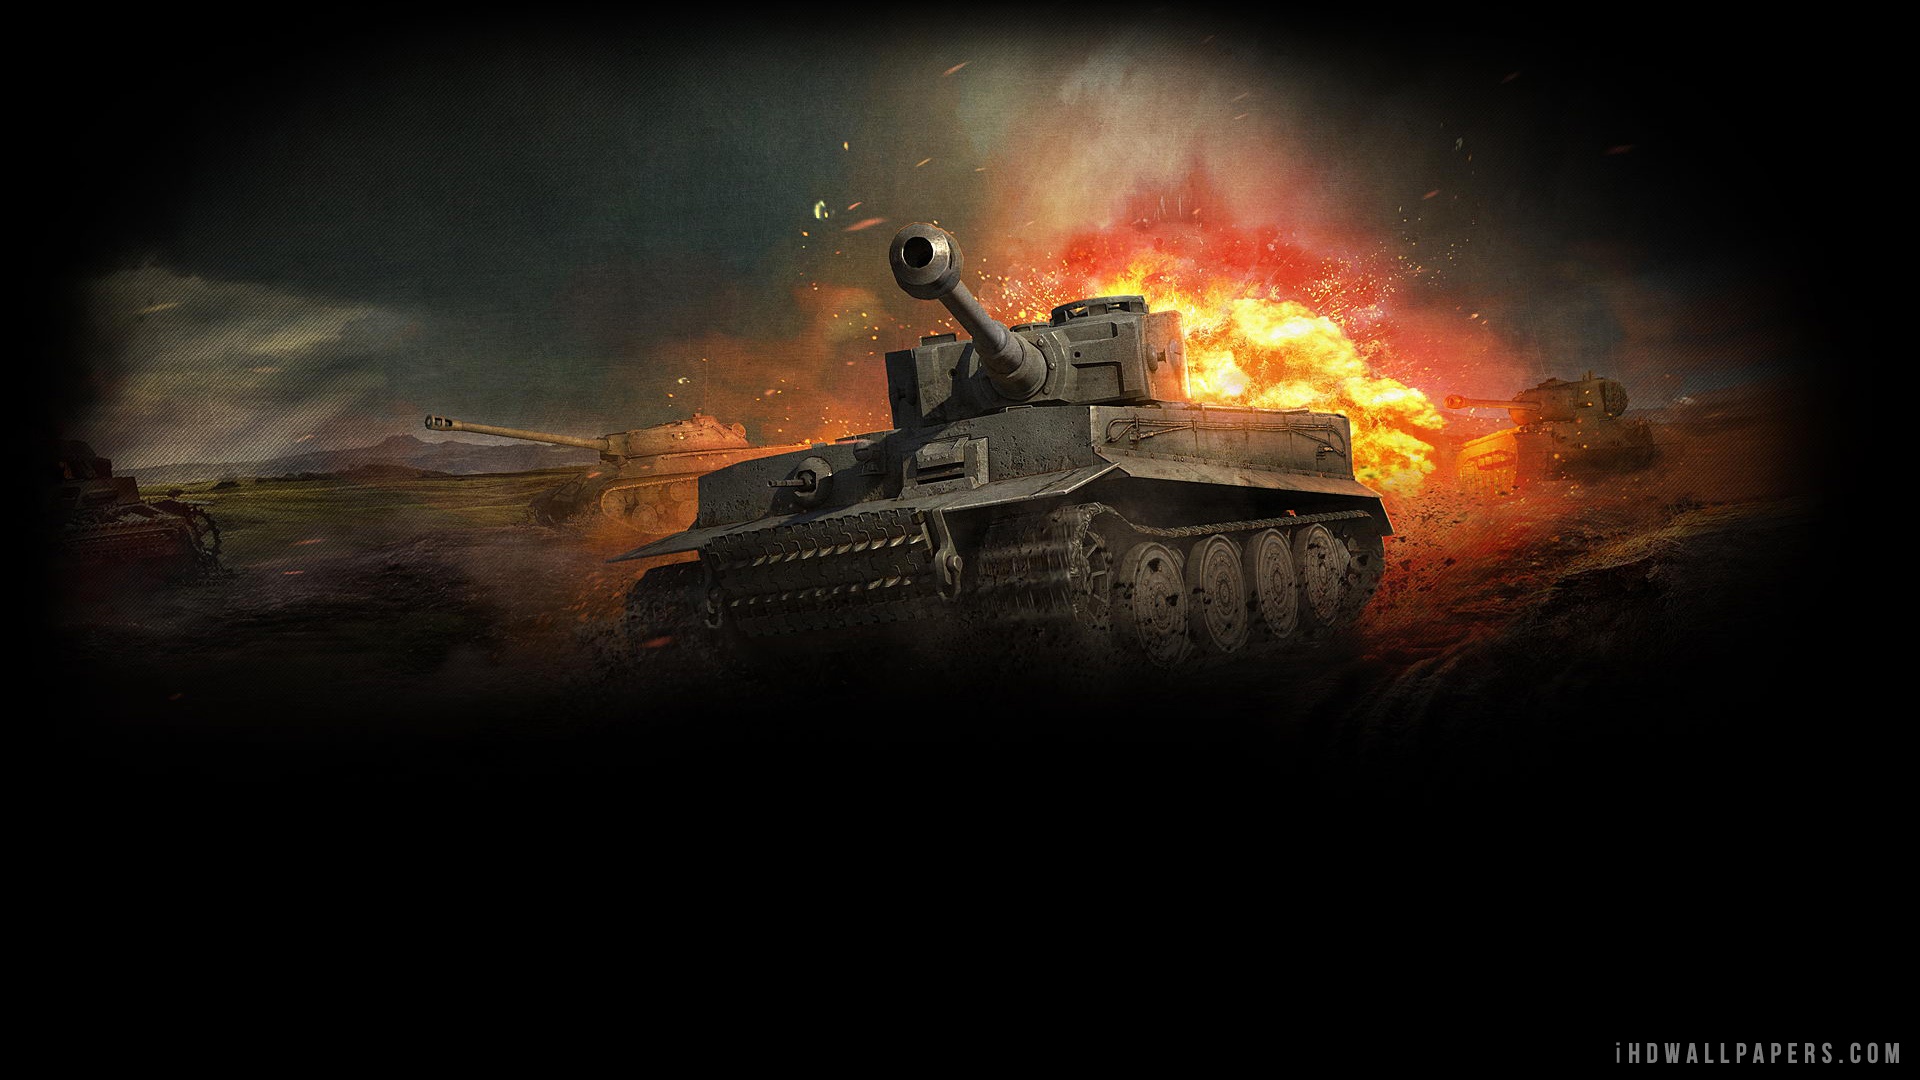  Download World Of Tanks 2 WallpaperBackground in 1920x1080 HD